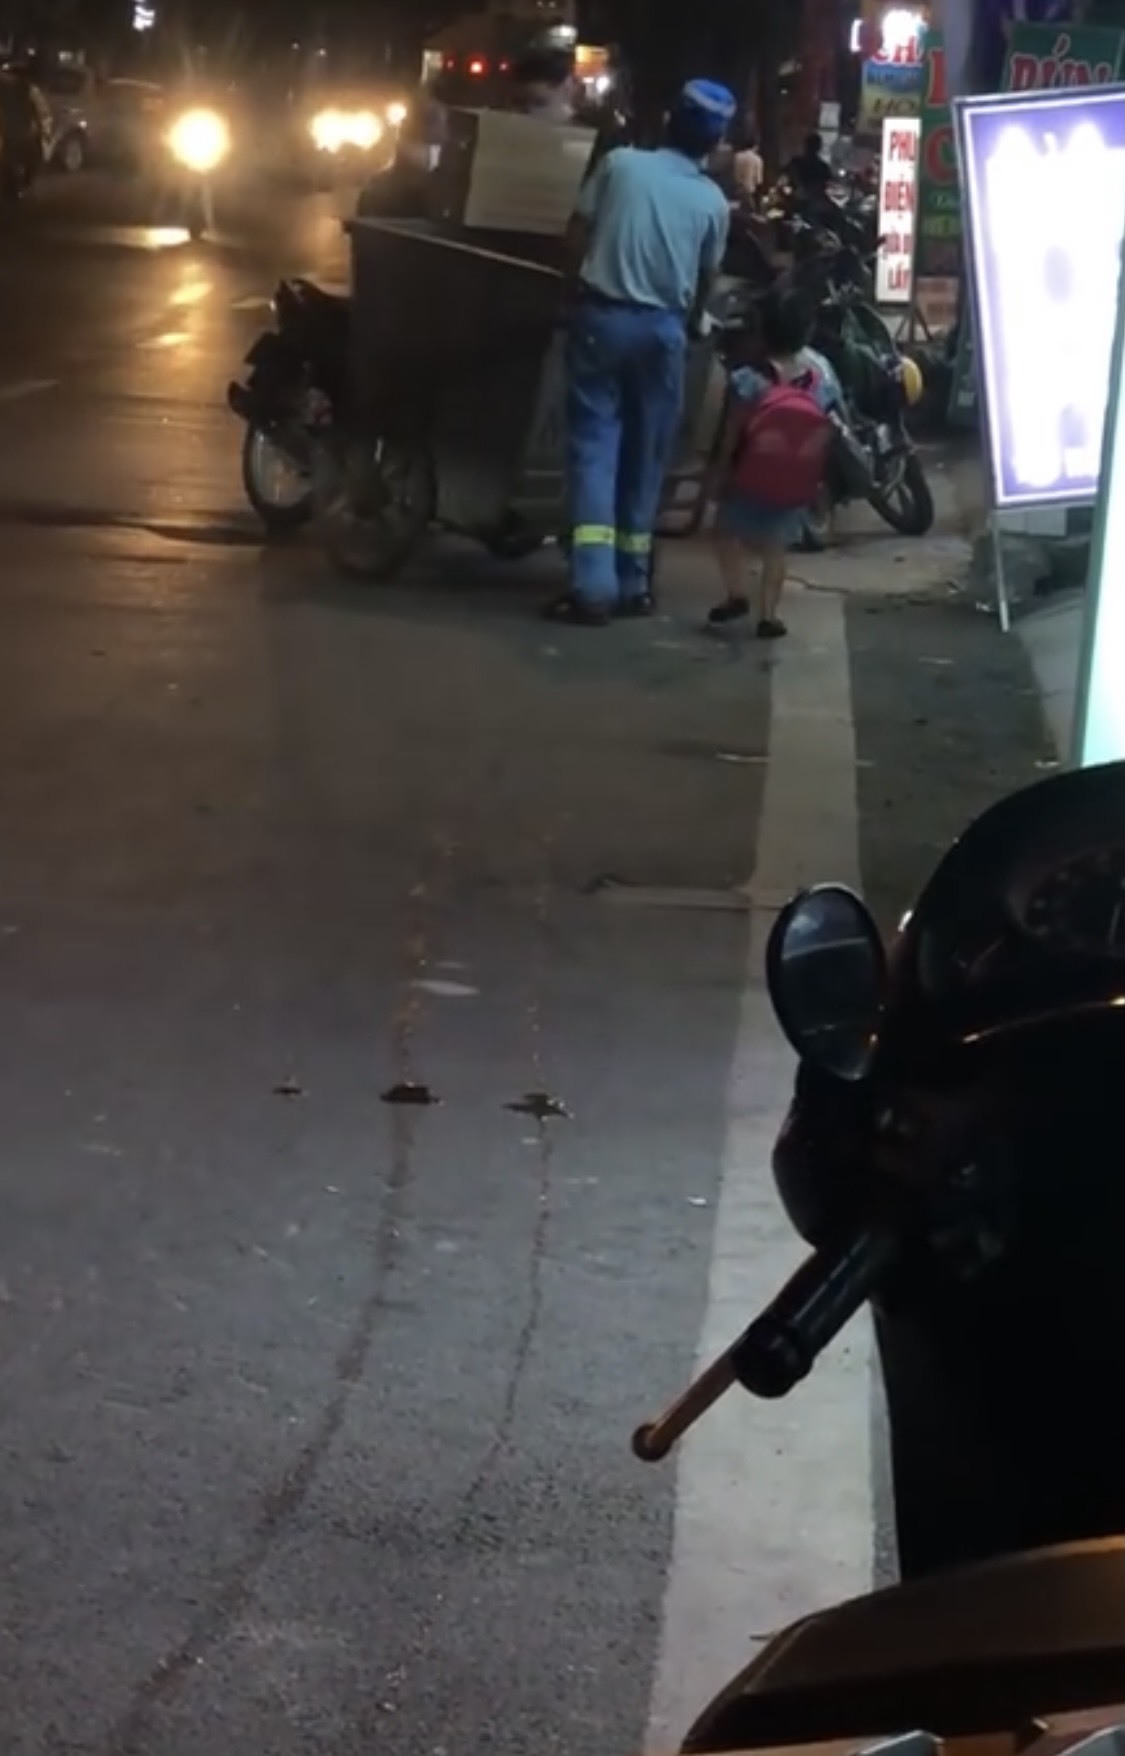 The clip of a 4-year-old girl following her father as a janitor to collect garbage in Hanoi is heartwarming